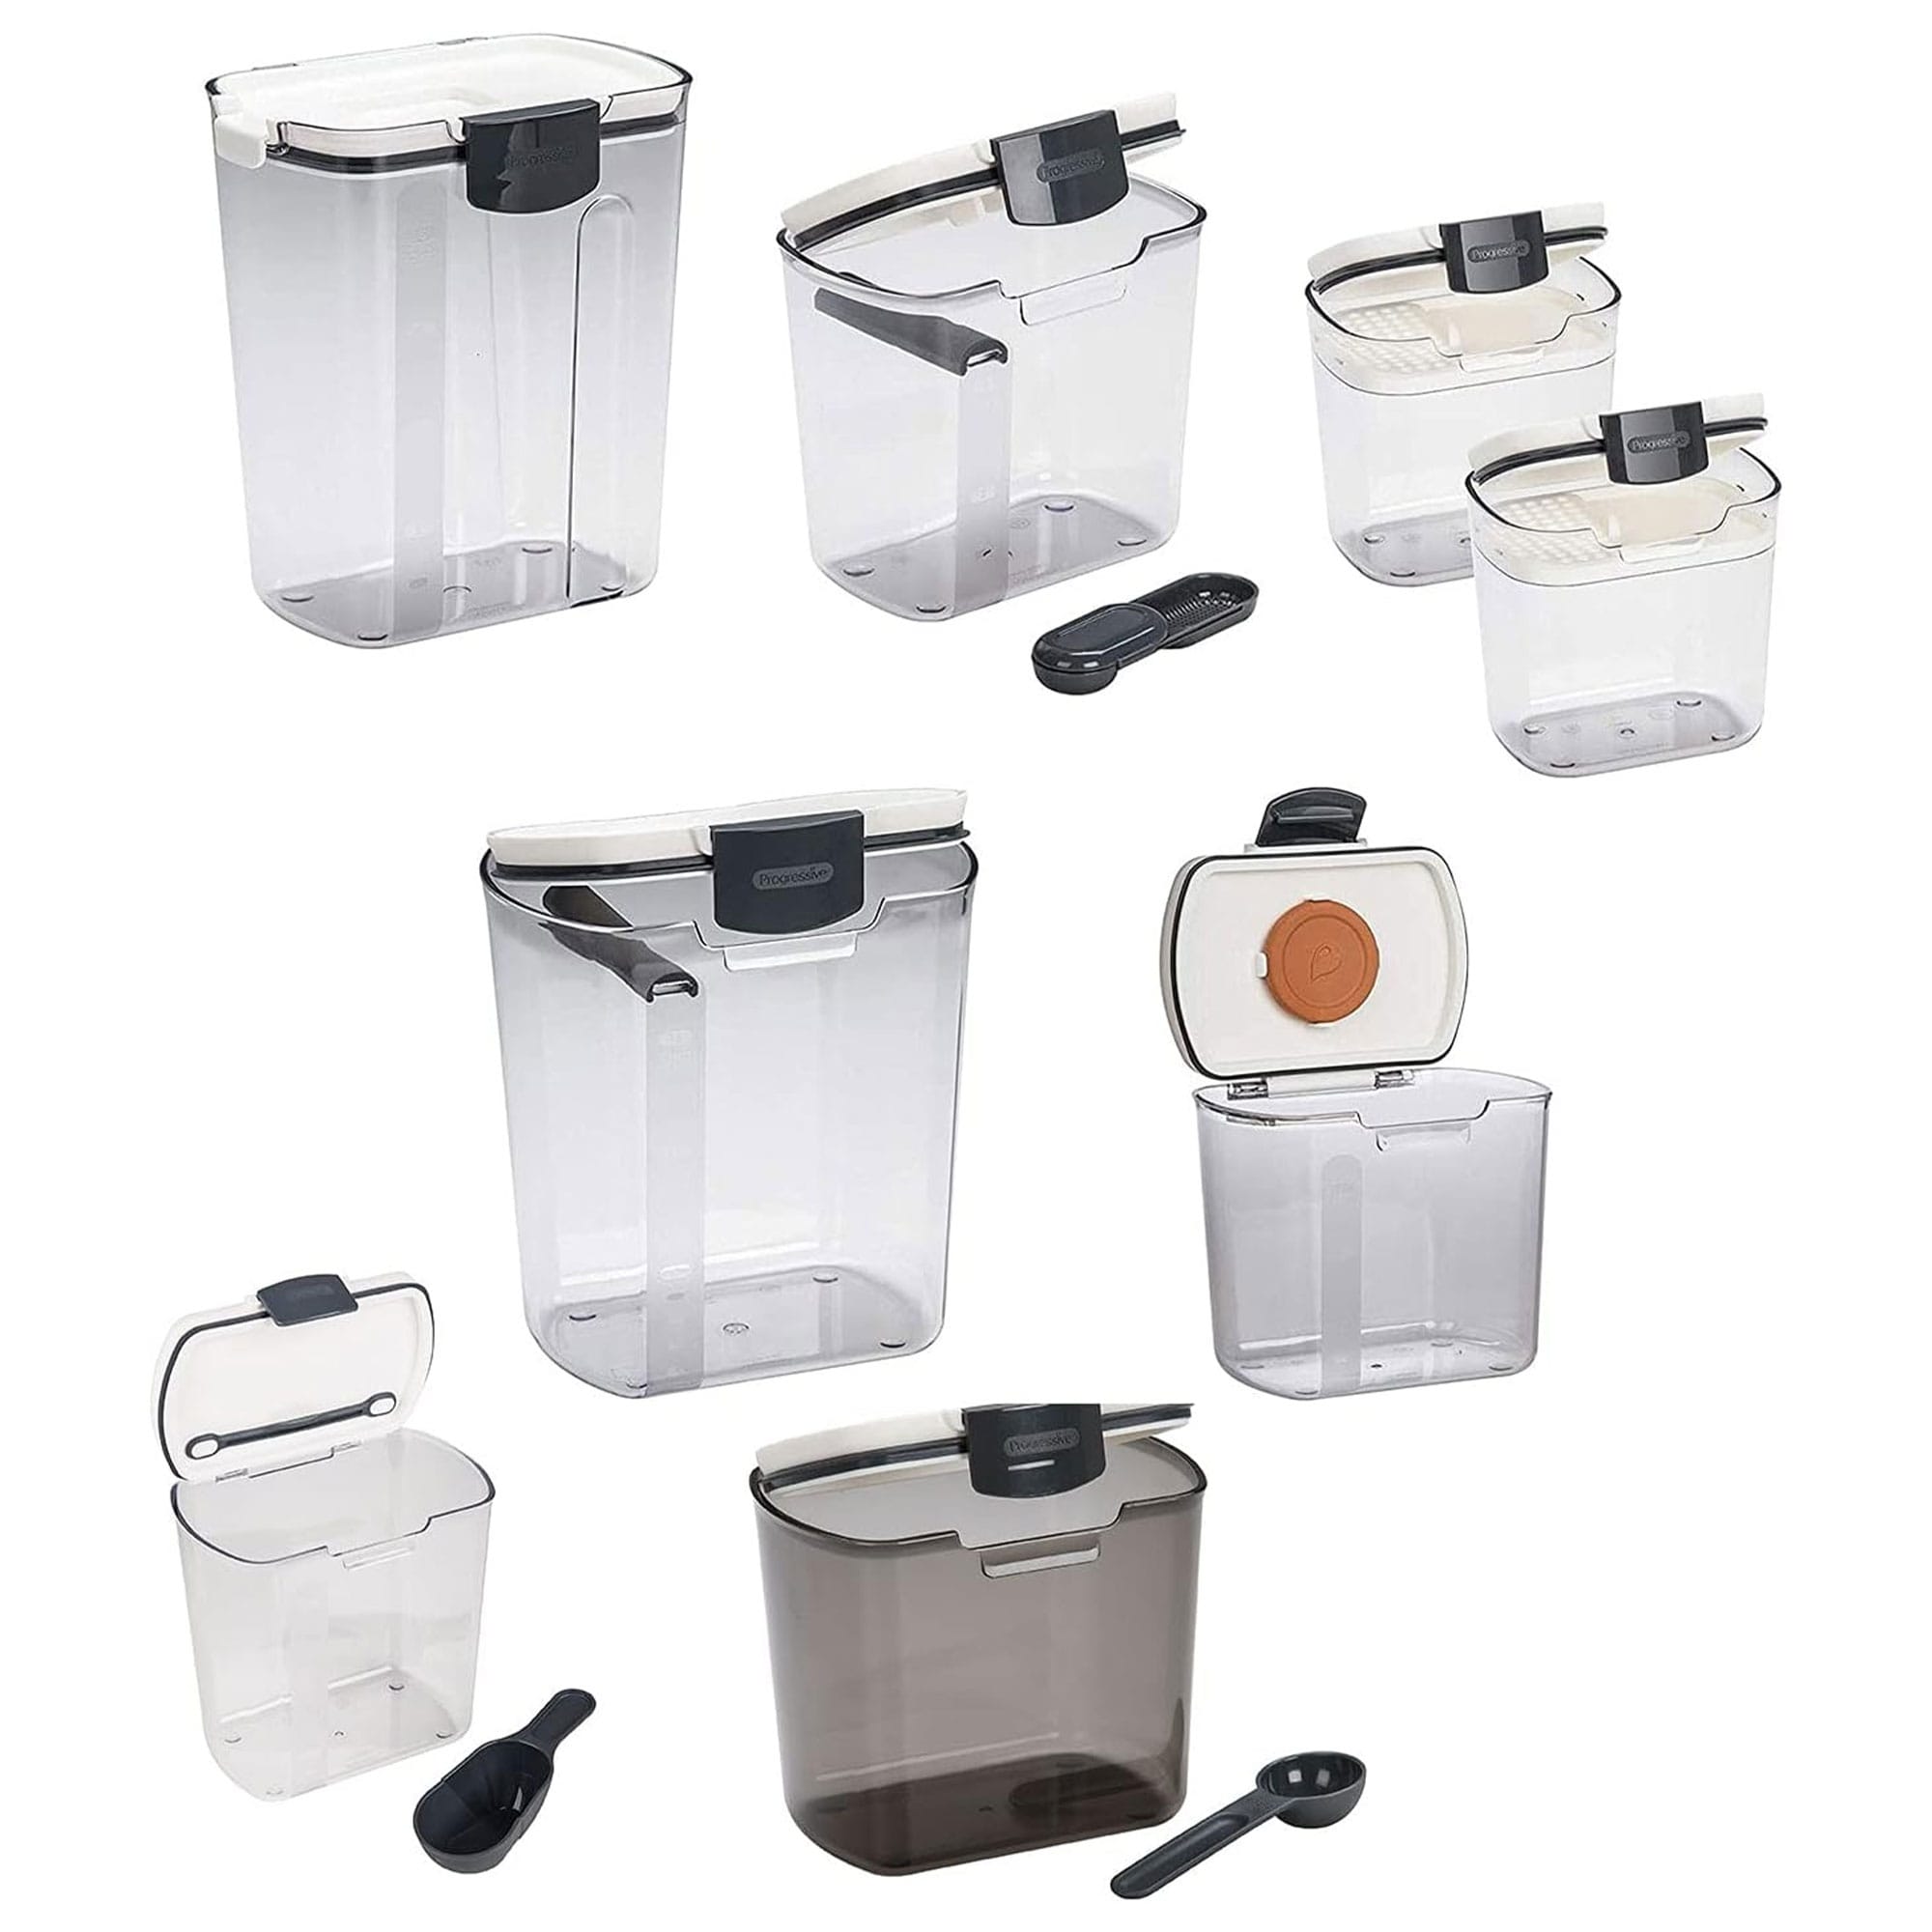 https://ak1.ostkcdn.com/images/products/is/images/direct/bf2f2d590827843f48a93b20ed4f679cffc786ee/Progressive-International-8-Piece-Set-with-Coffee-Container-%26-Grain-Container.jpg